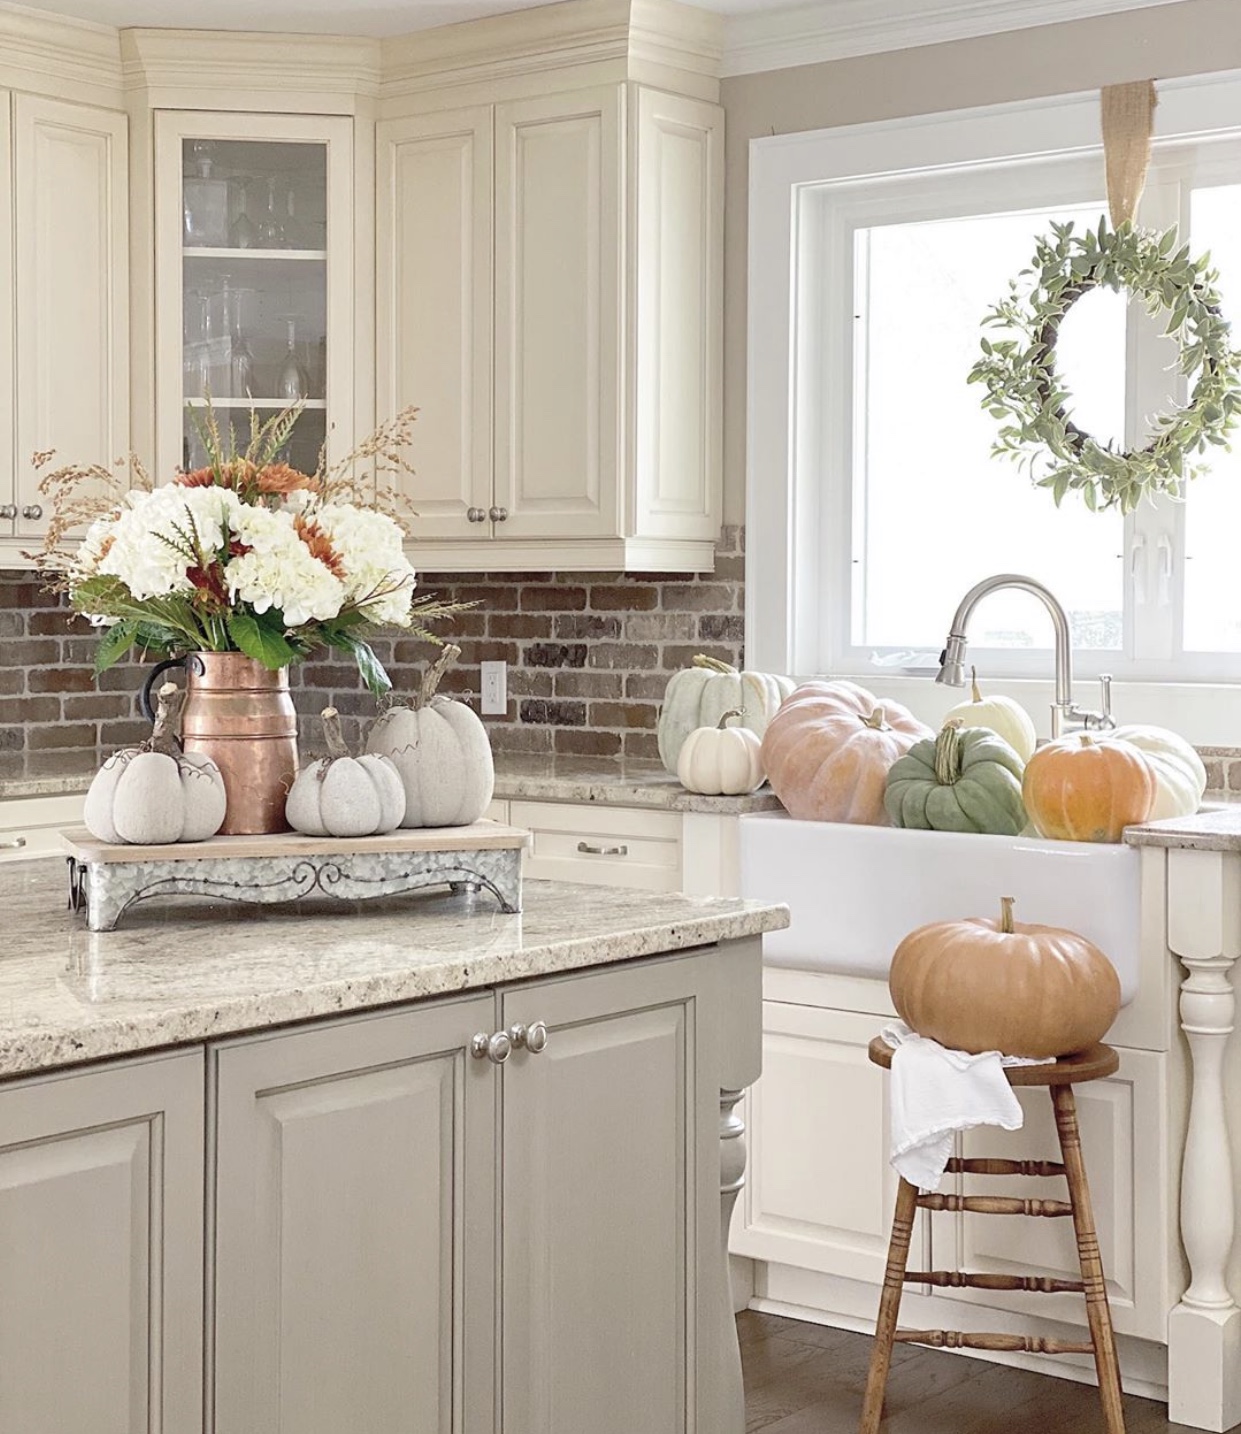 Kitchen with pumpkins in the farmhouse sink and a Fall floral arrangement on the island with concrete pumpkins.